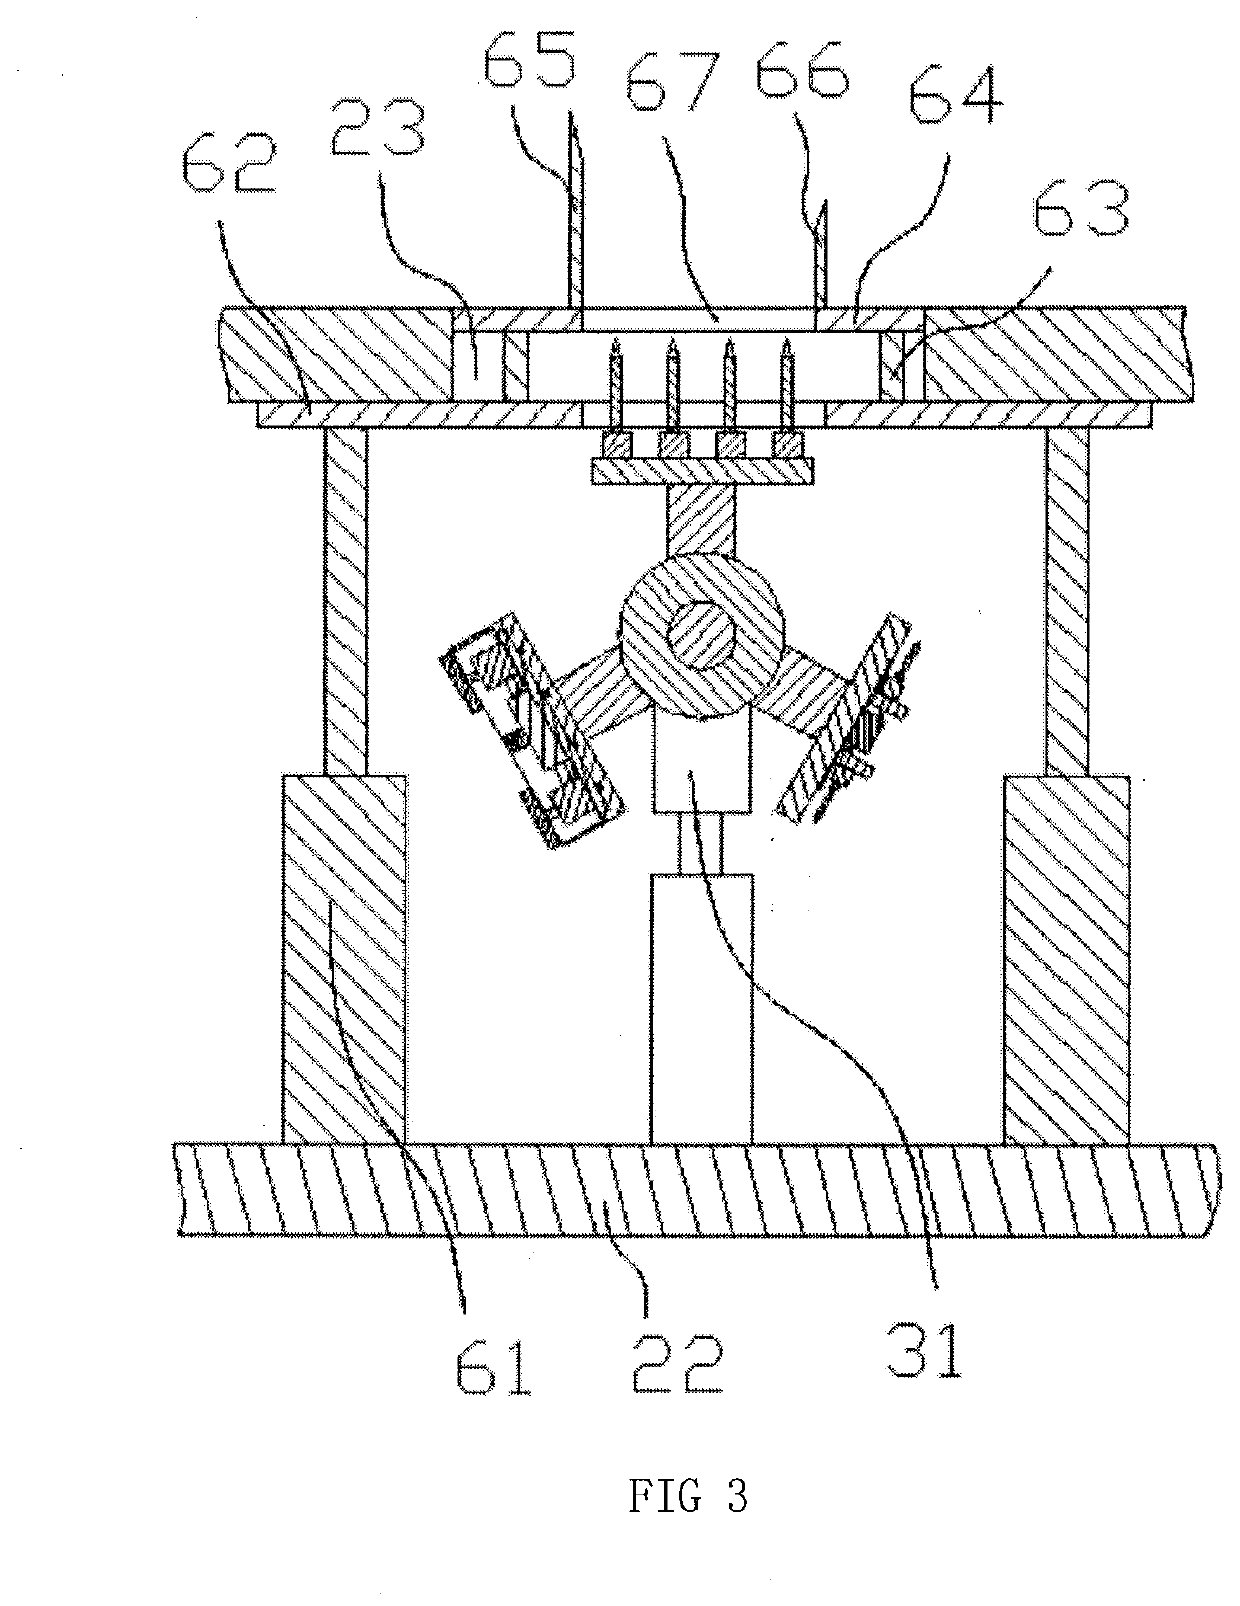 Integrated processing machine for positioning, trimming, and punching ceiling splicing structures